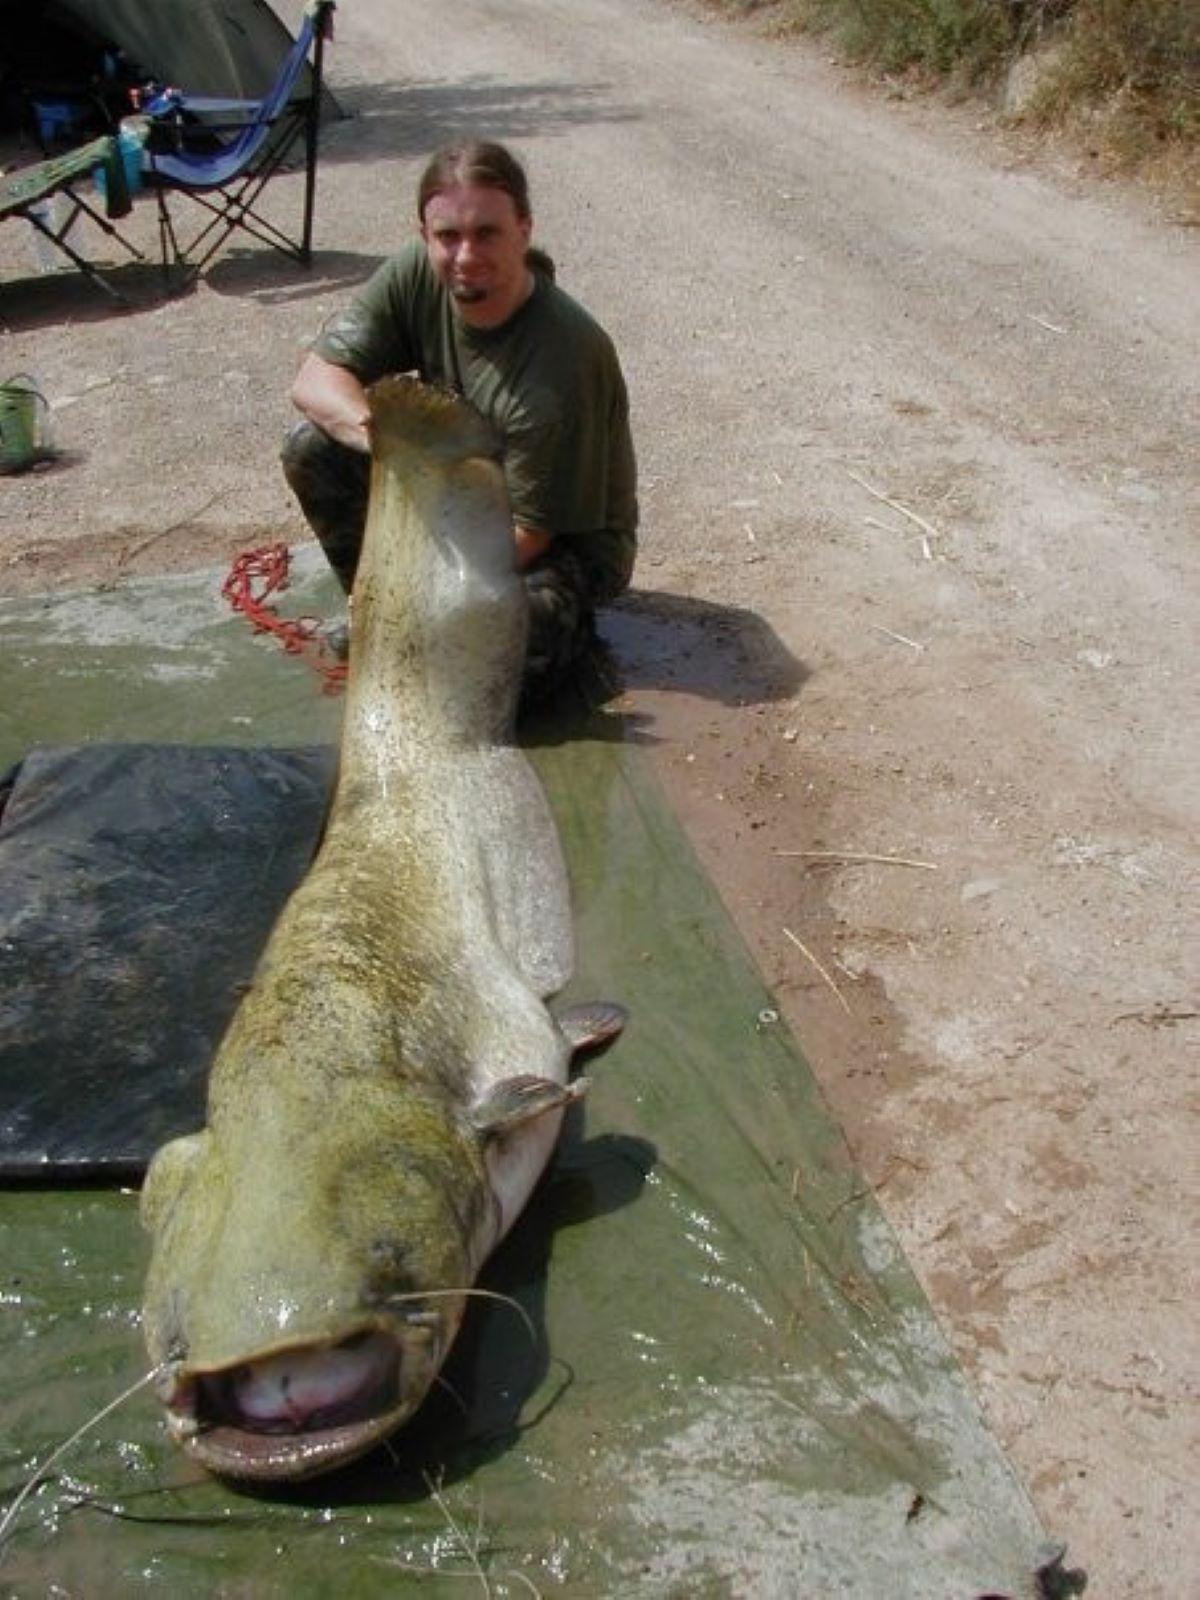 Angler uses hands to pull in giant catfish after net breaks